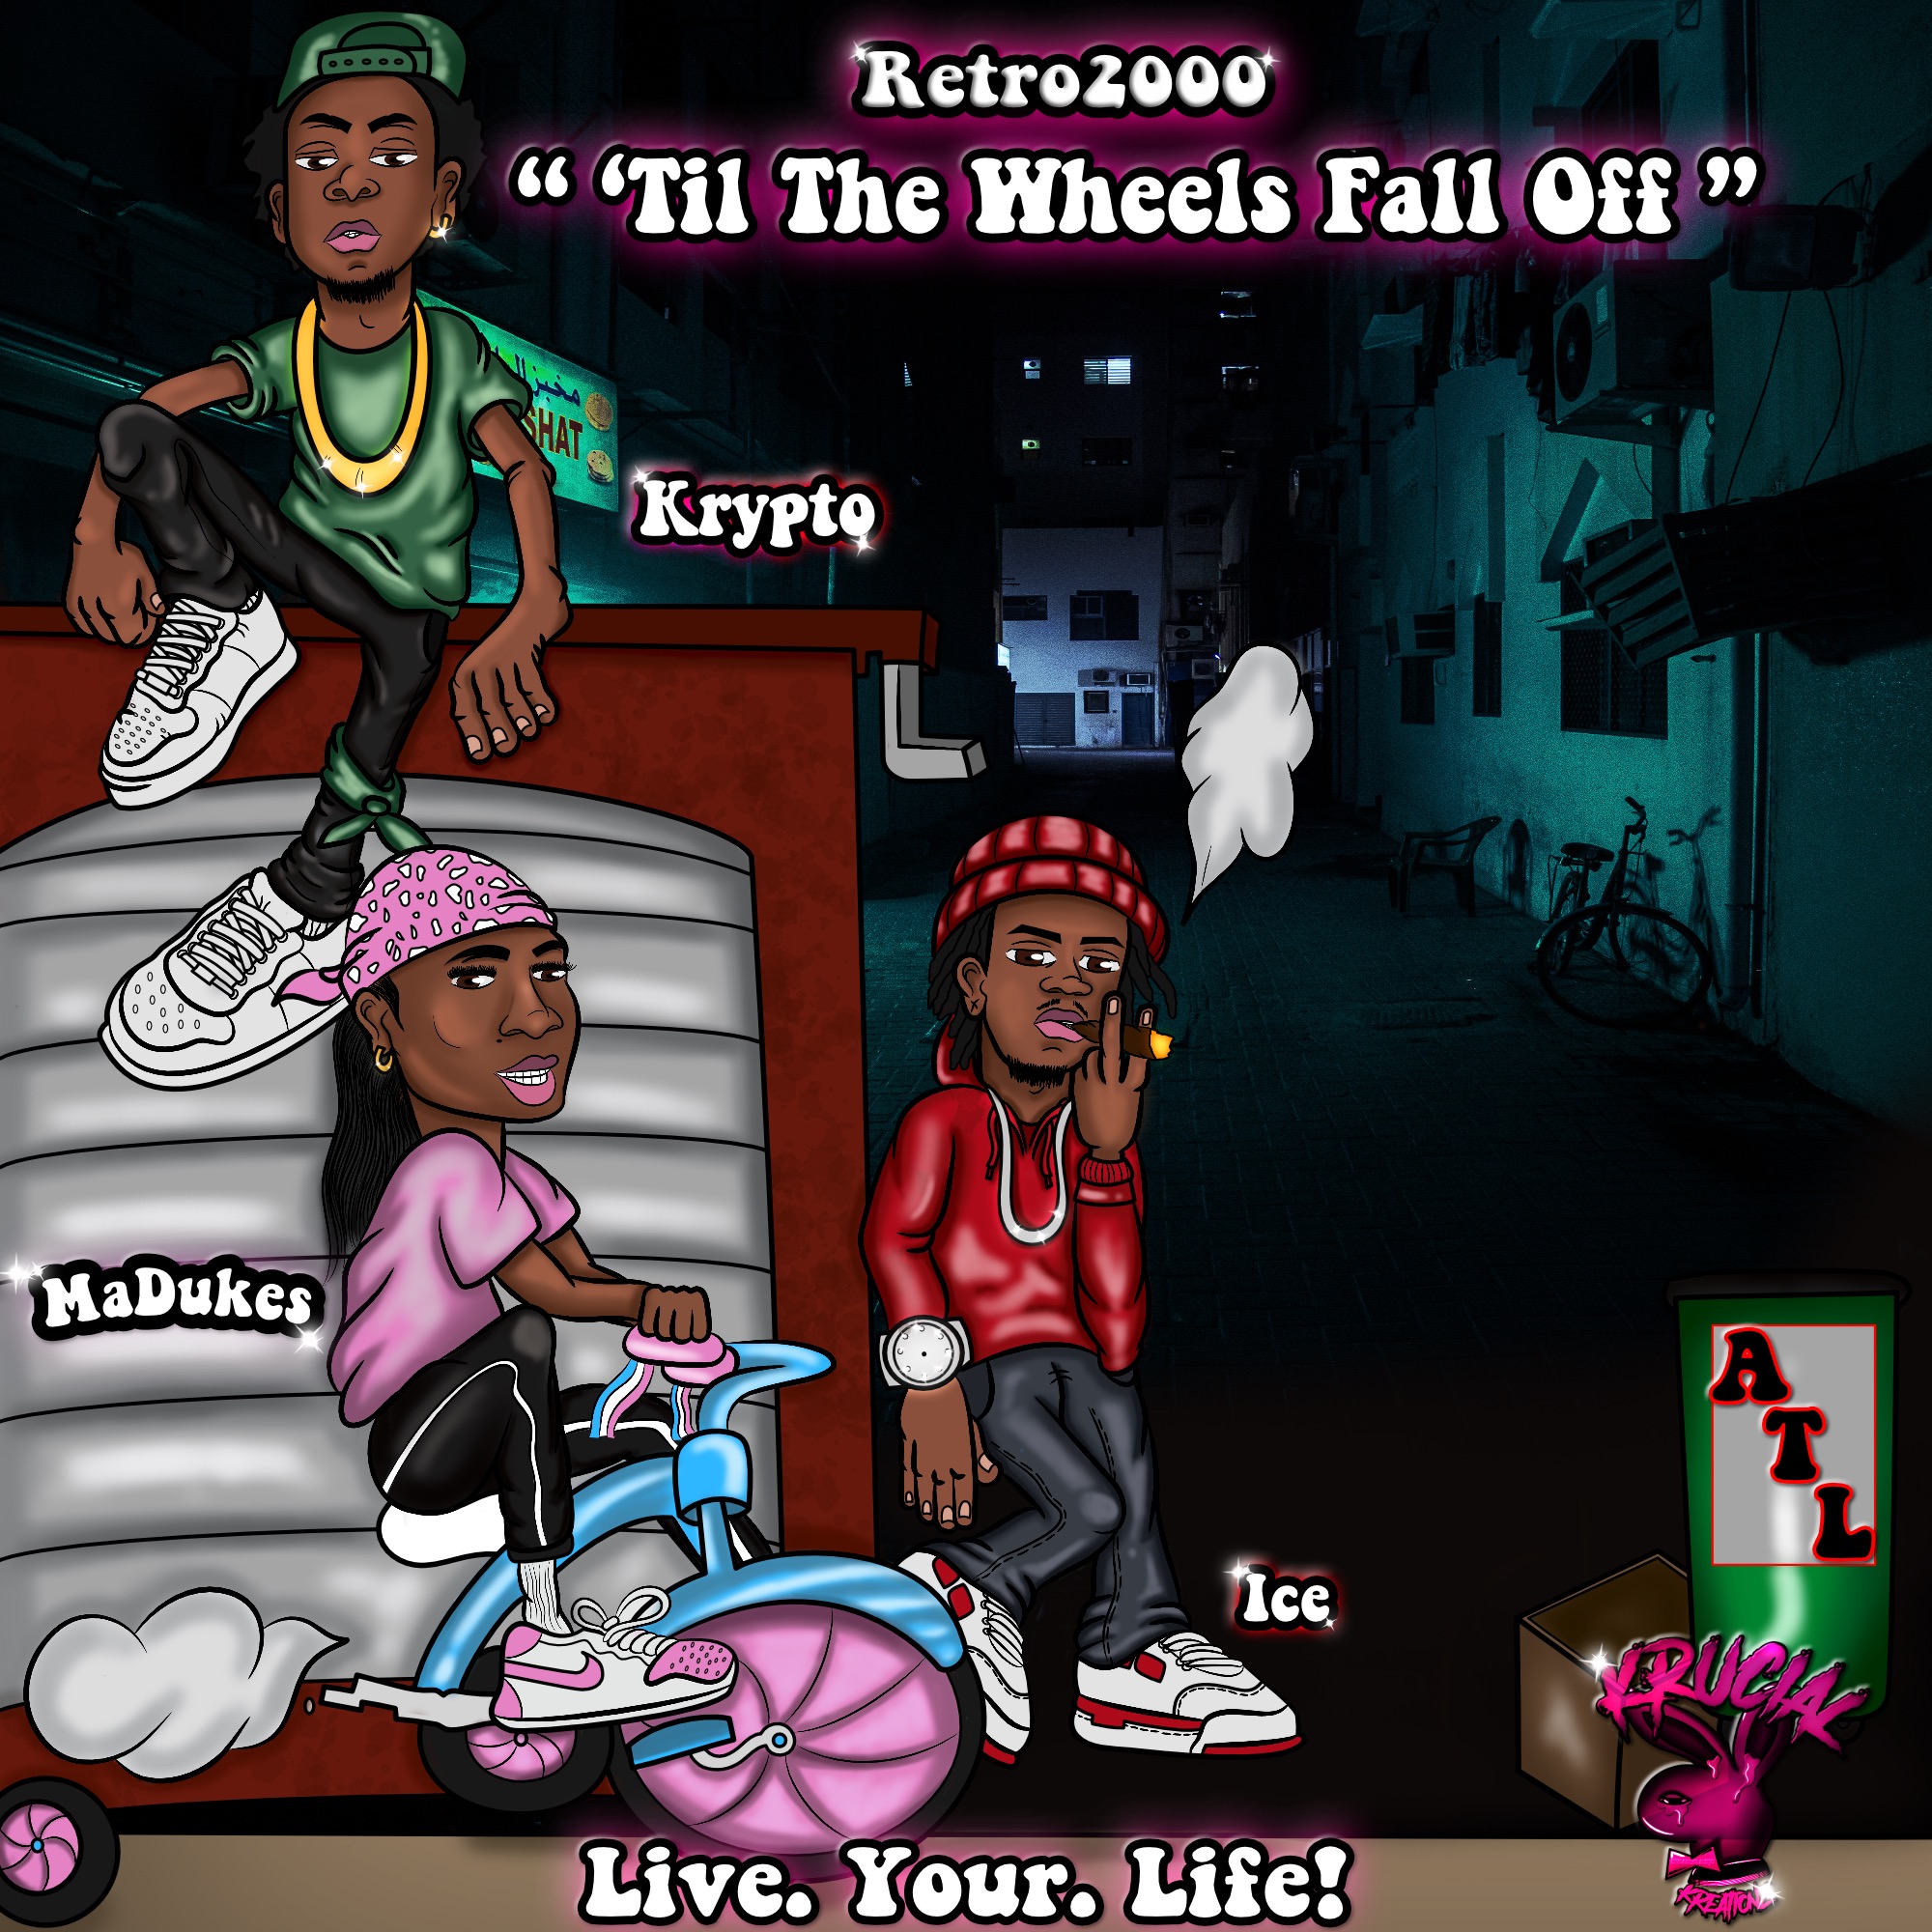 Art for Til The Wheels Fall Off by Retro2000